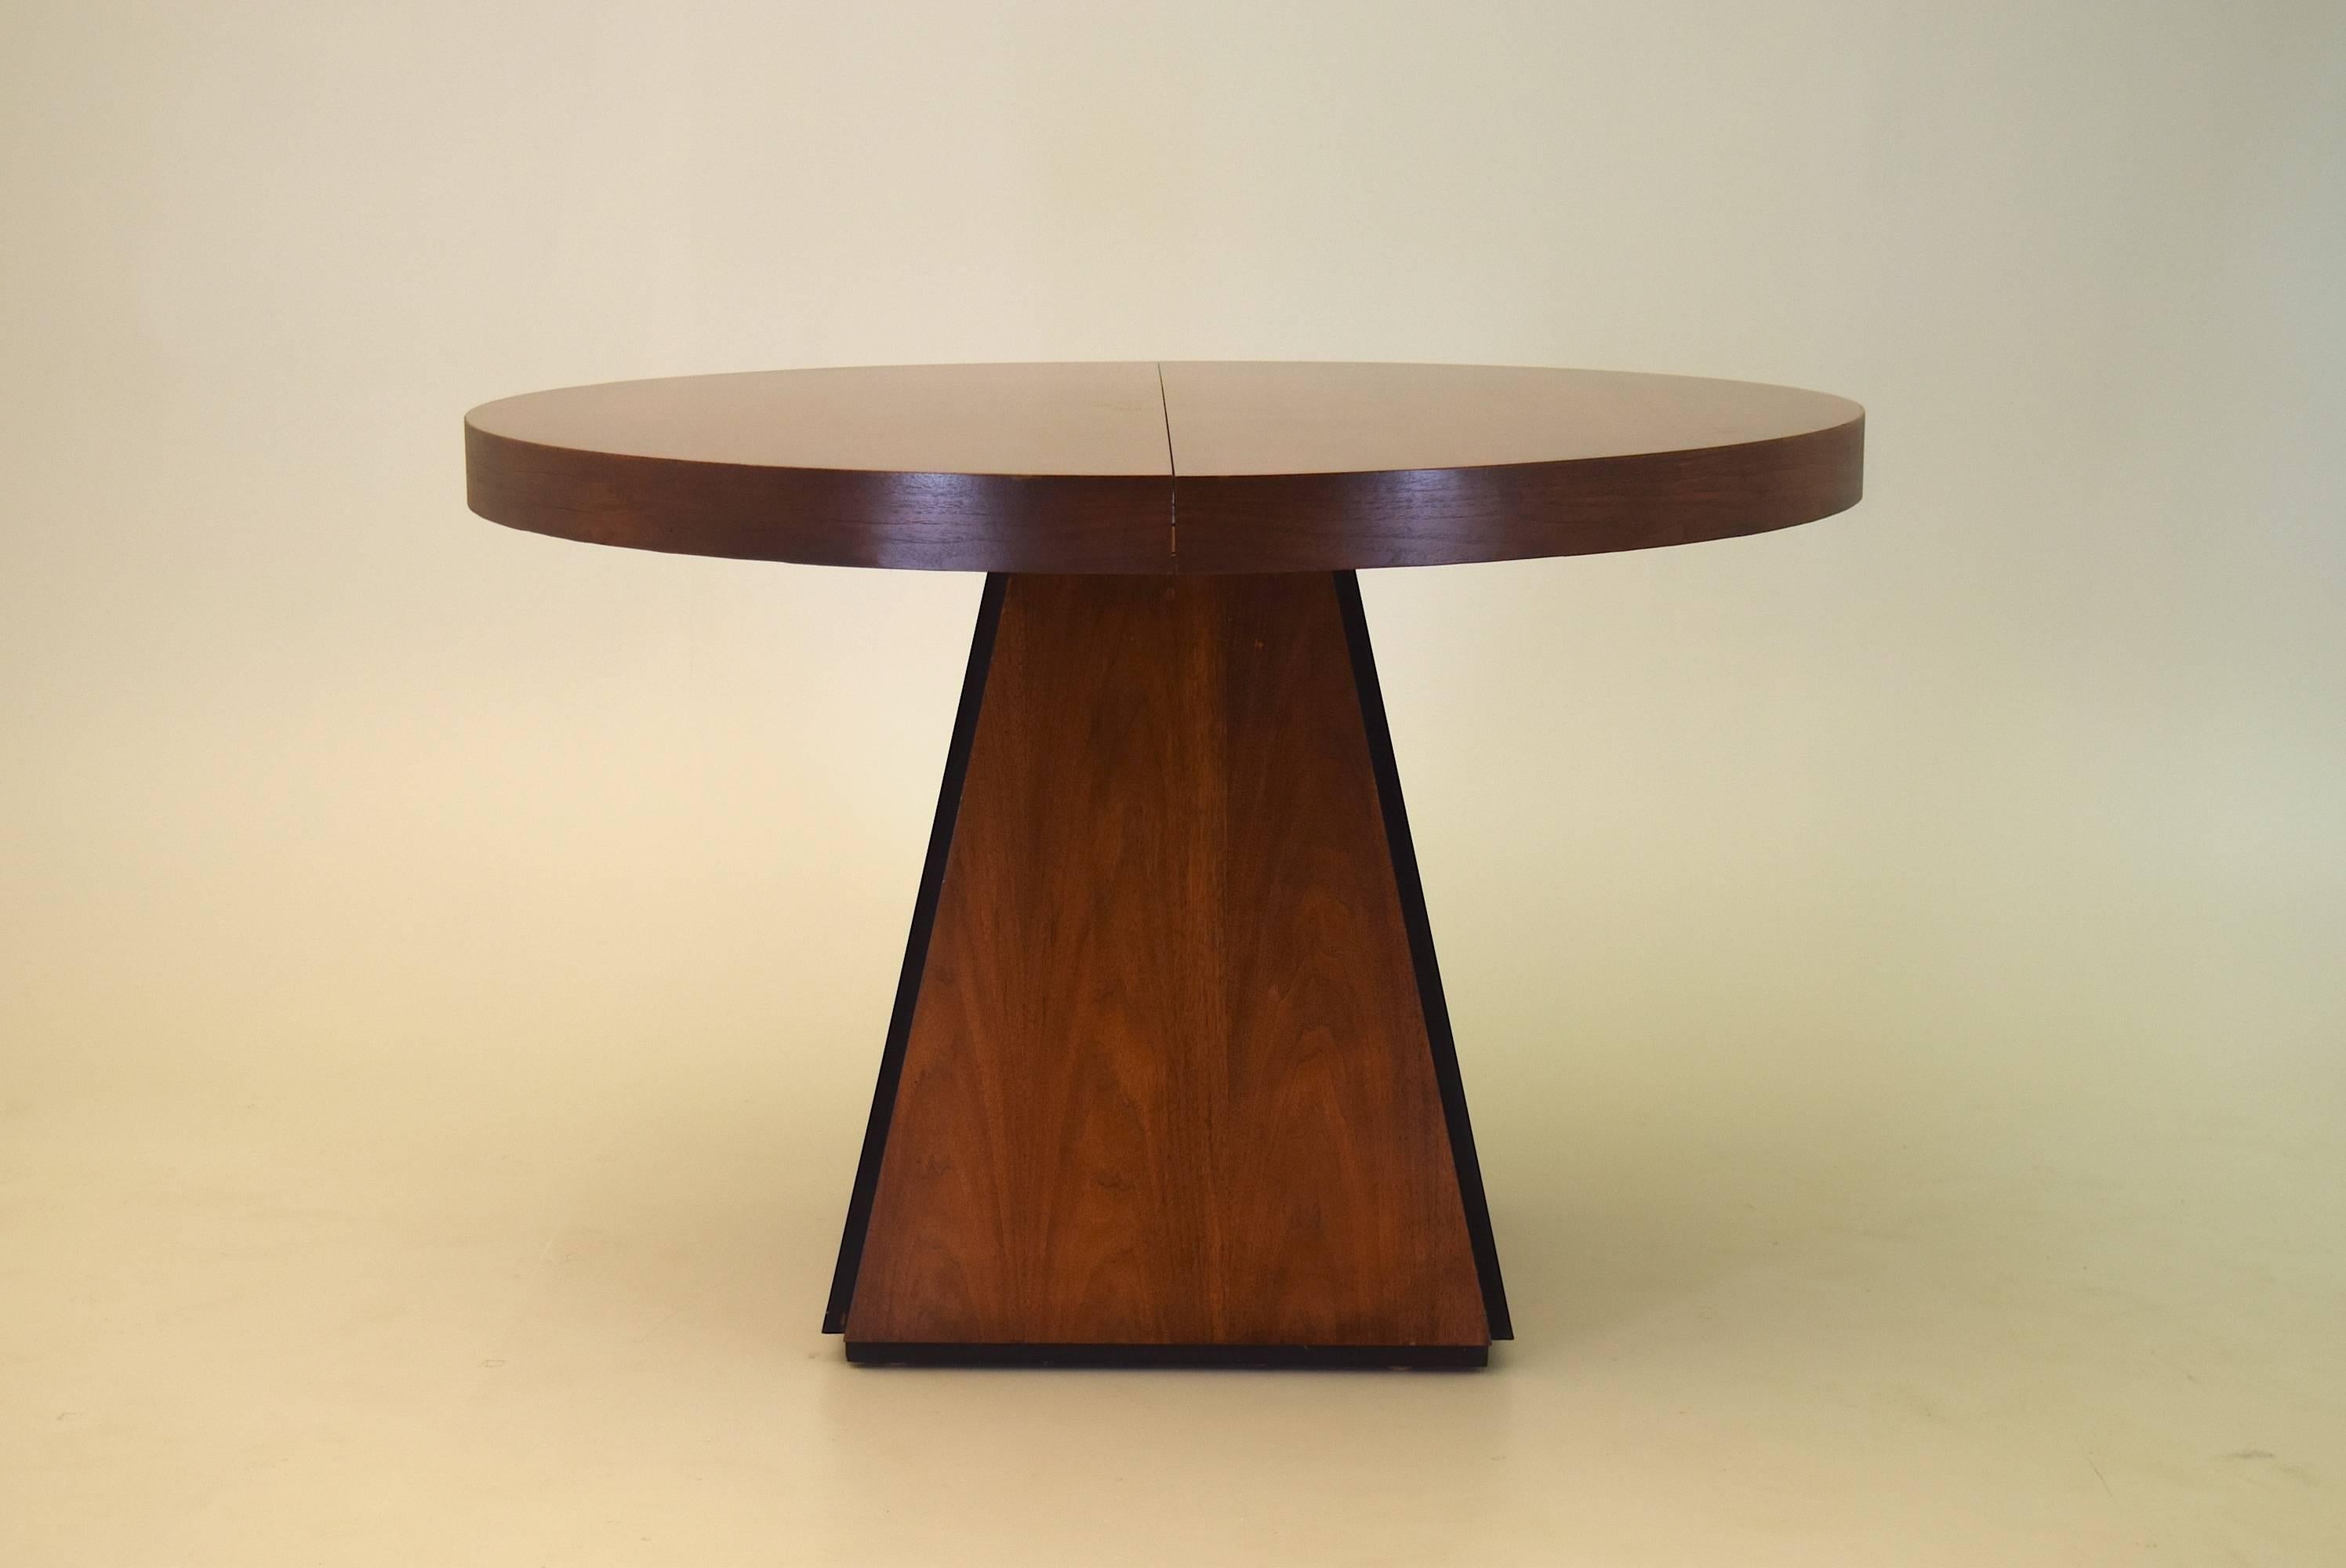 Pierre Cardin Round Obelisk Dining Table in Walnut with Extension Leaf 1